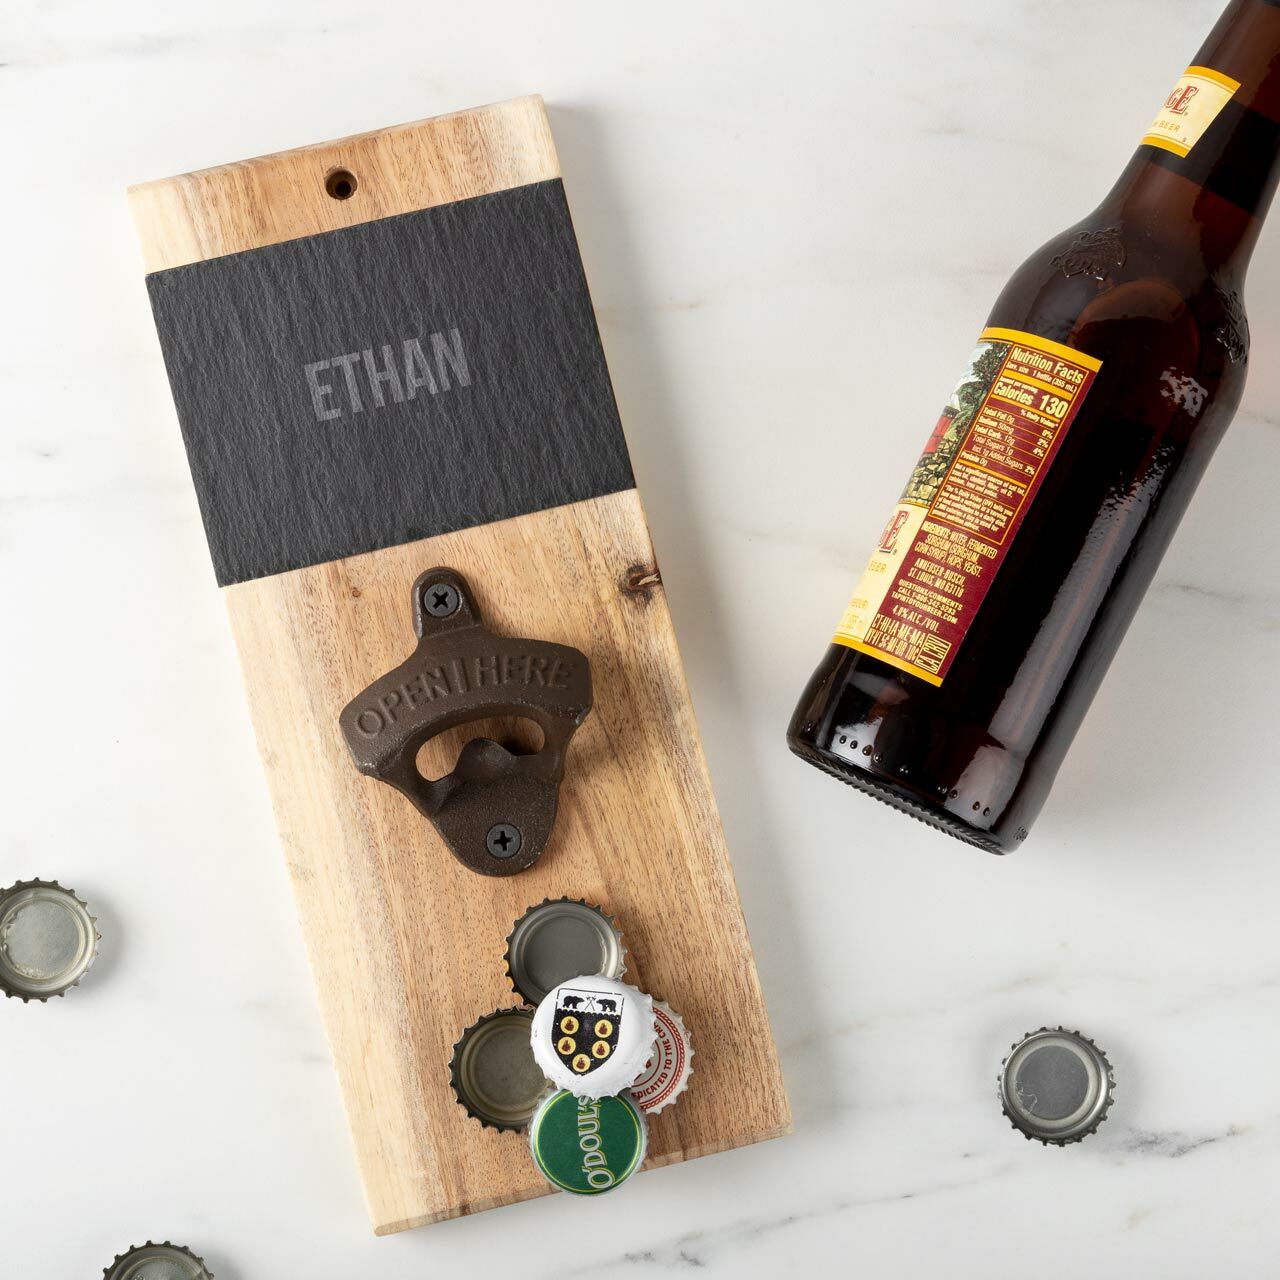 Personalized Wall Mount Bottle Opener Magnetic, Wall Bottle Opener Magnet,  Engraved Wall Mounted Bottle Opener With Magnet, Beer Gift 